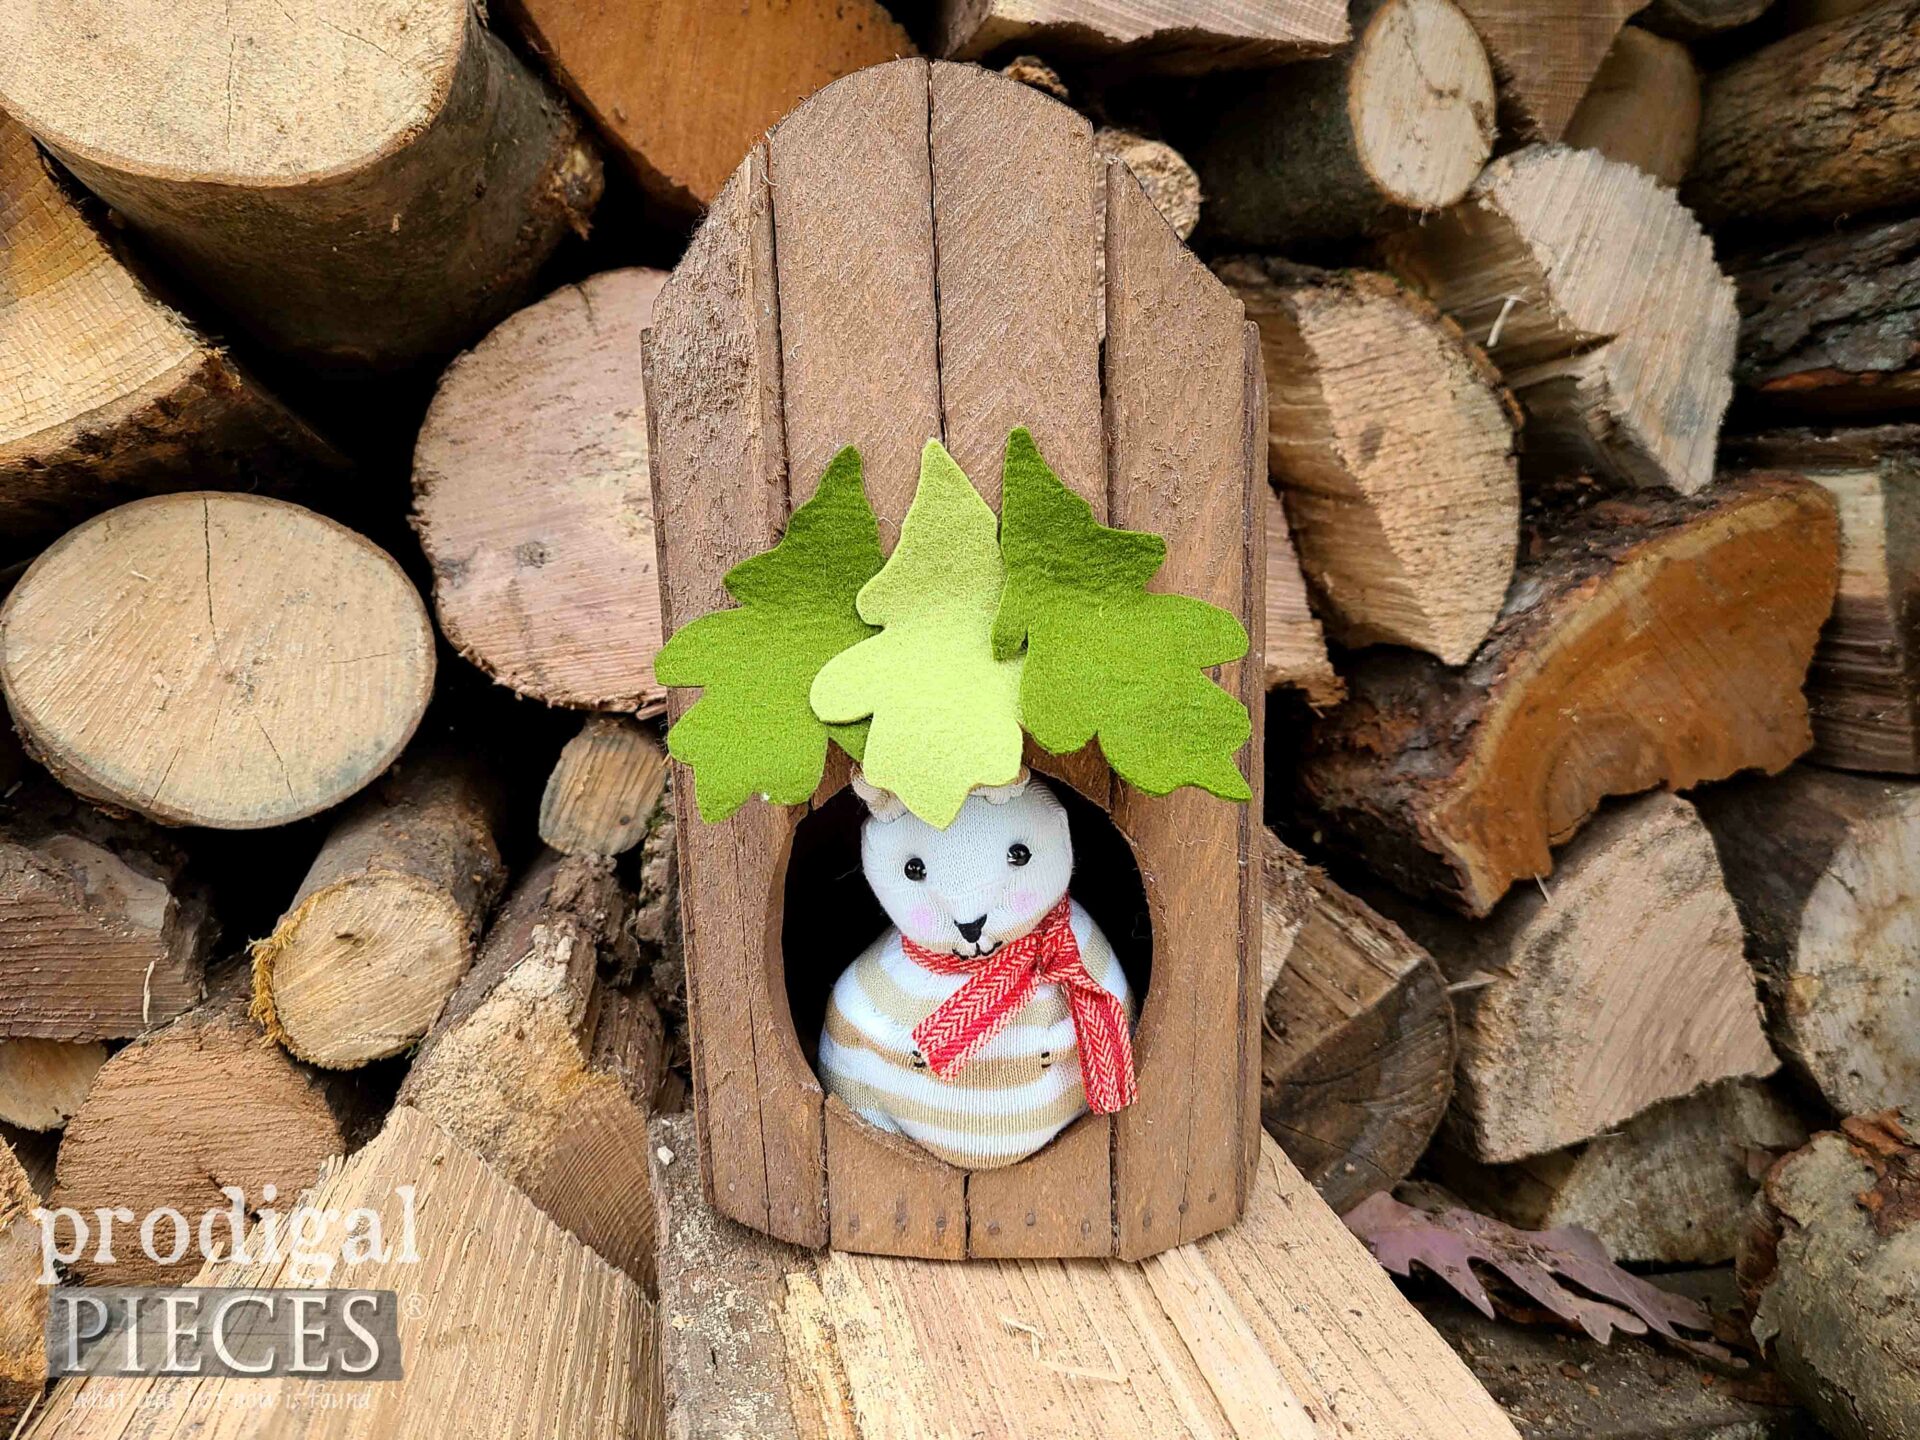 DIY Sock Squirrel in Thrifted Planter Treehouse by Larissa of Prodigal Pieces | prodigalpieces.com #prodigalpieces #upcycled #handmade #toys #thrifted